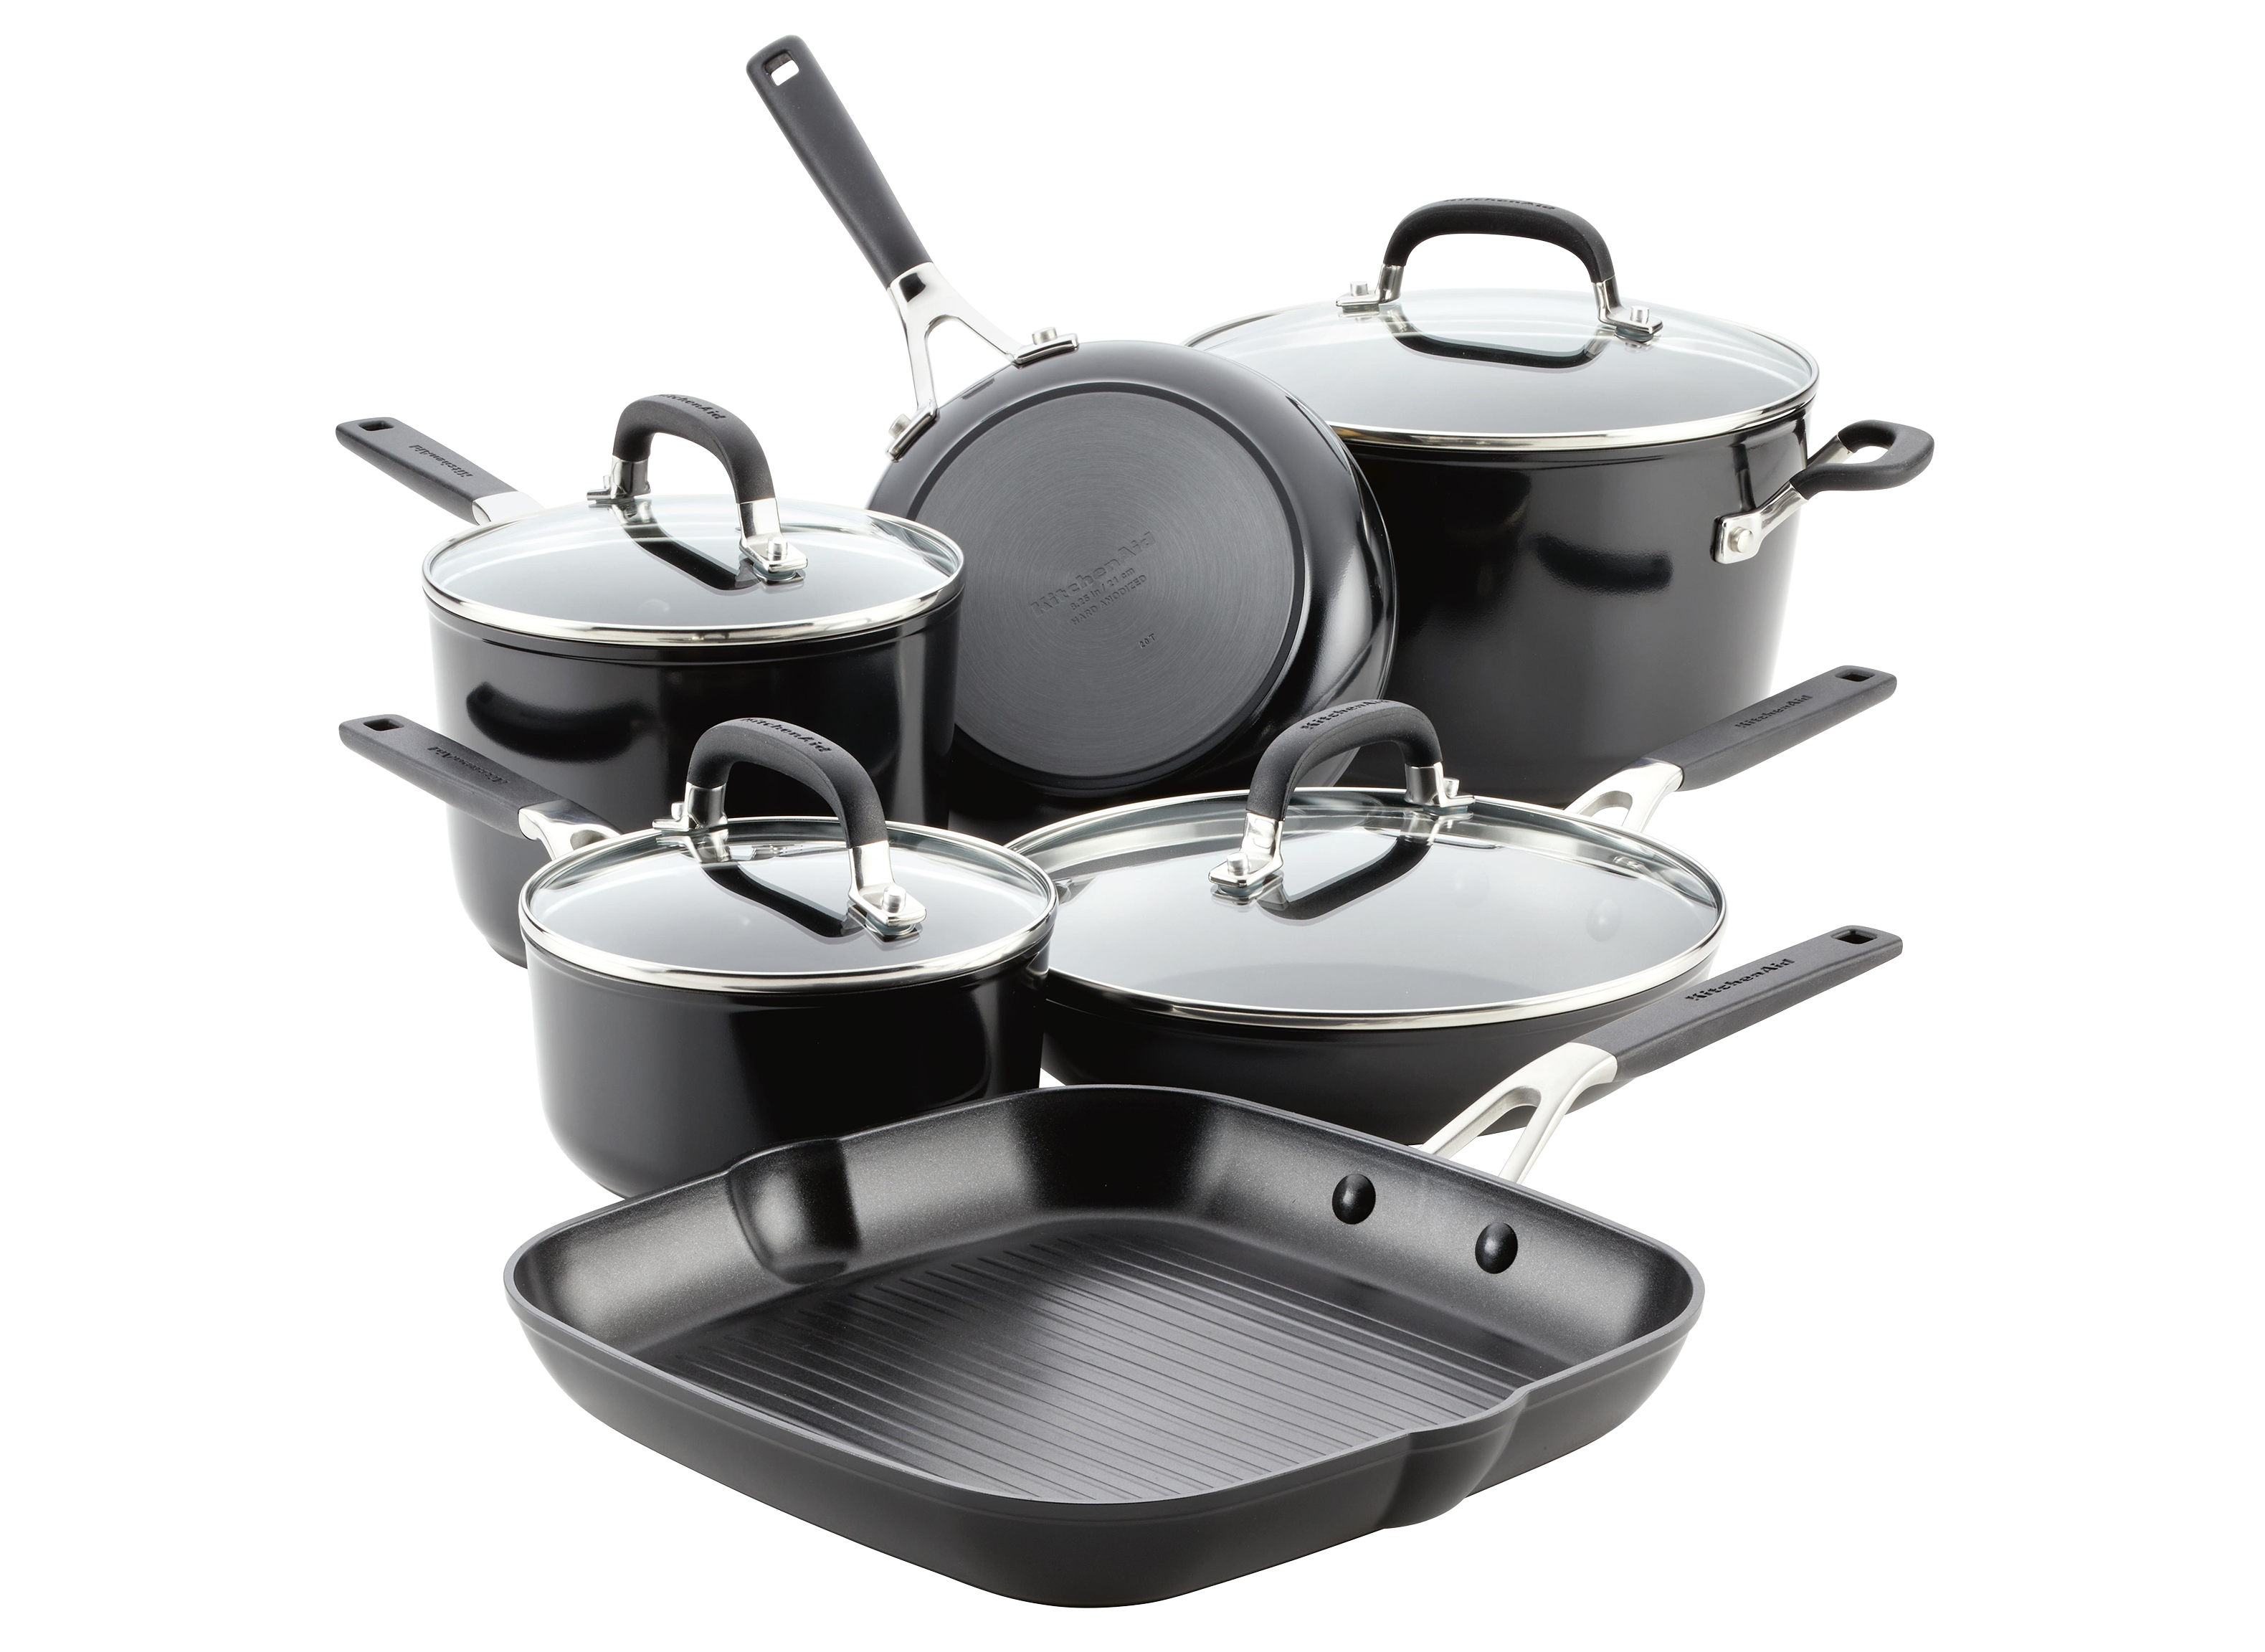 https://crdms.images.consumerreports.org/prod/products/cr/models/407517-cookware-sets-nonstick-kitchenaid-hard-anodized-nonstick-10031592.png